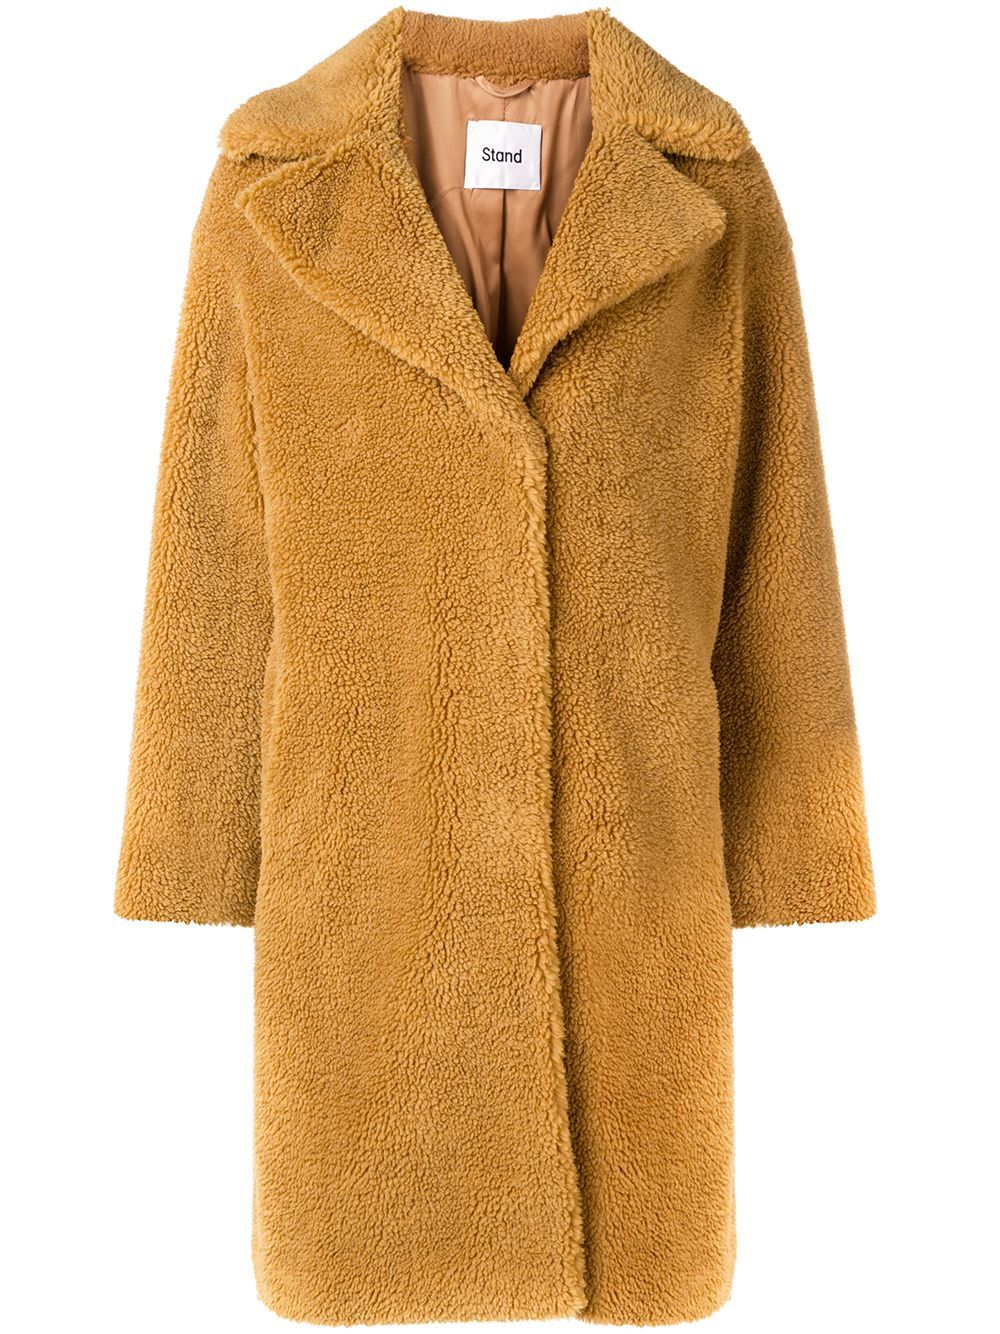 Stand faux shearling coat - Brown | FarFetch Global